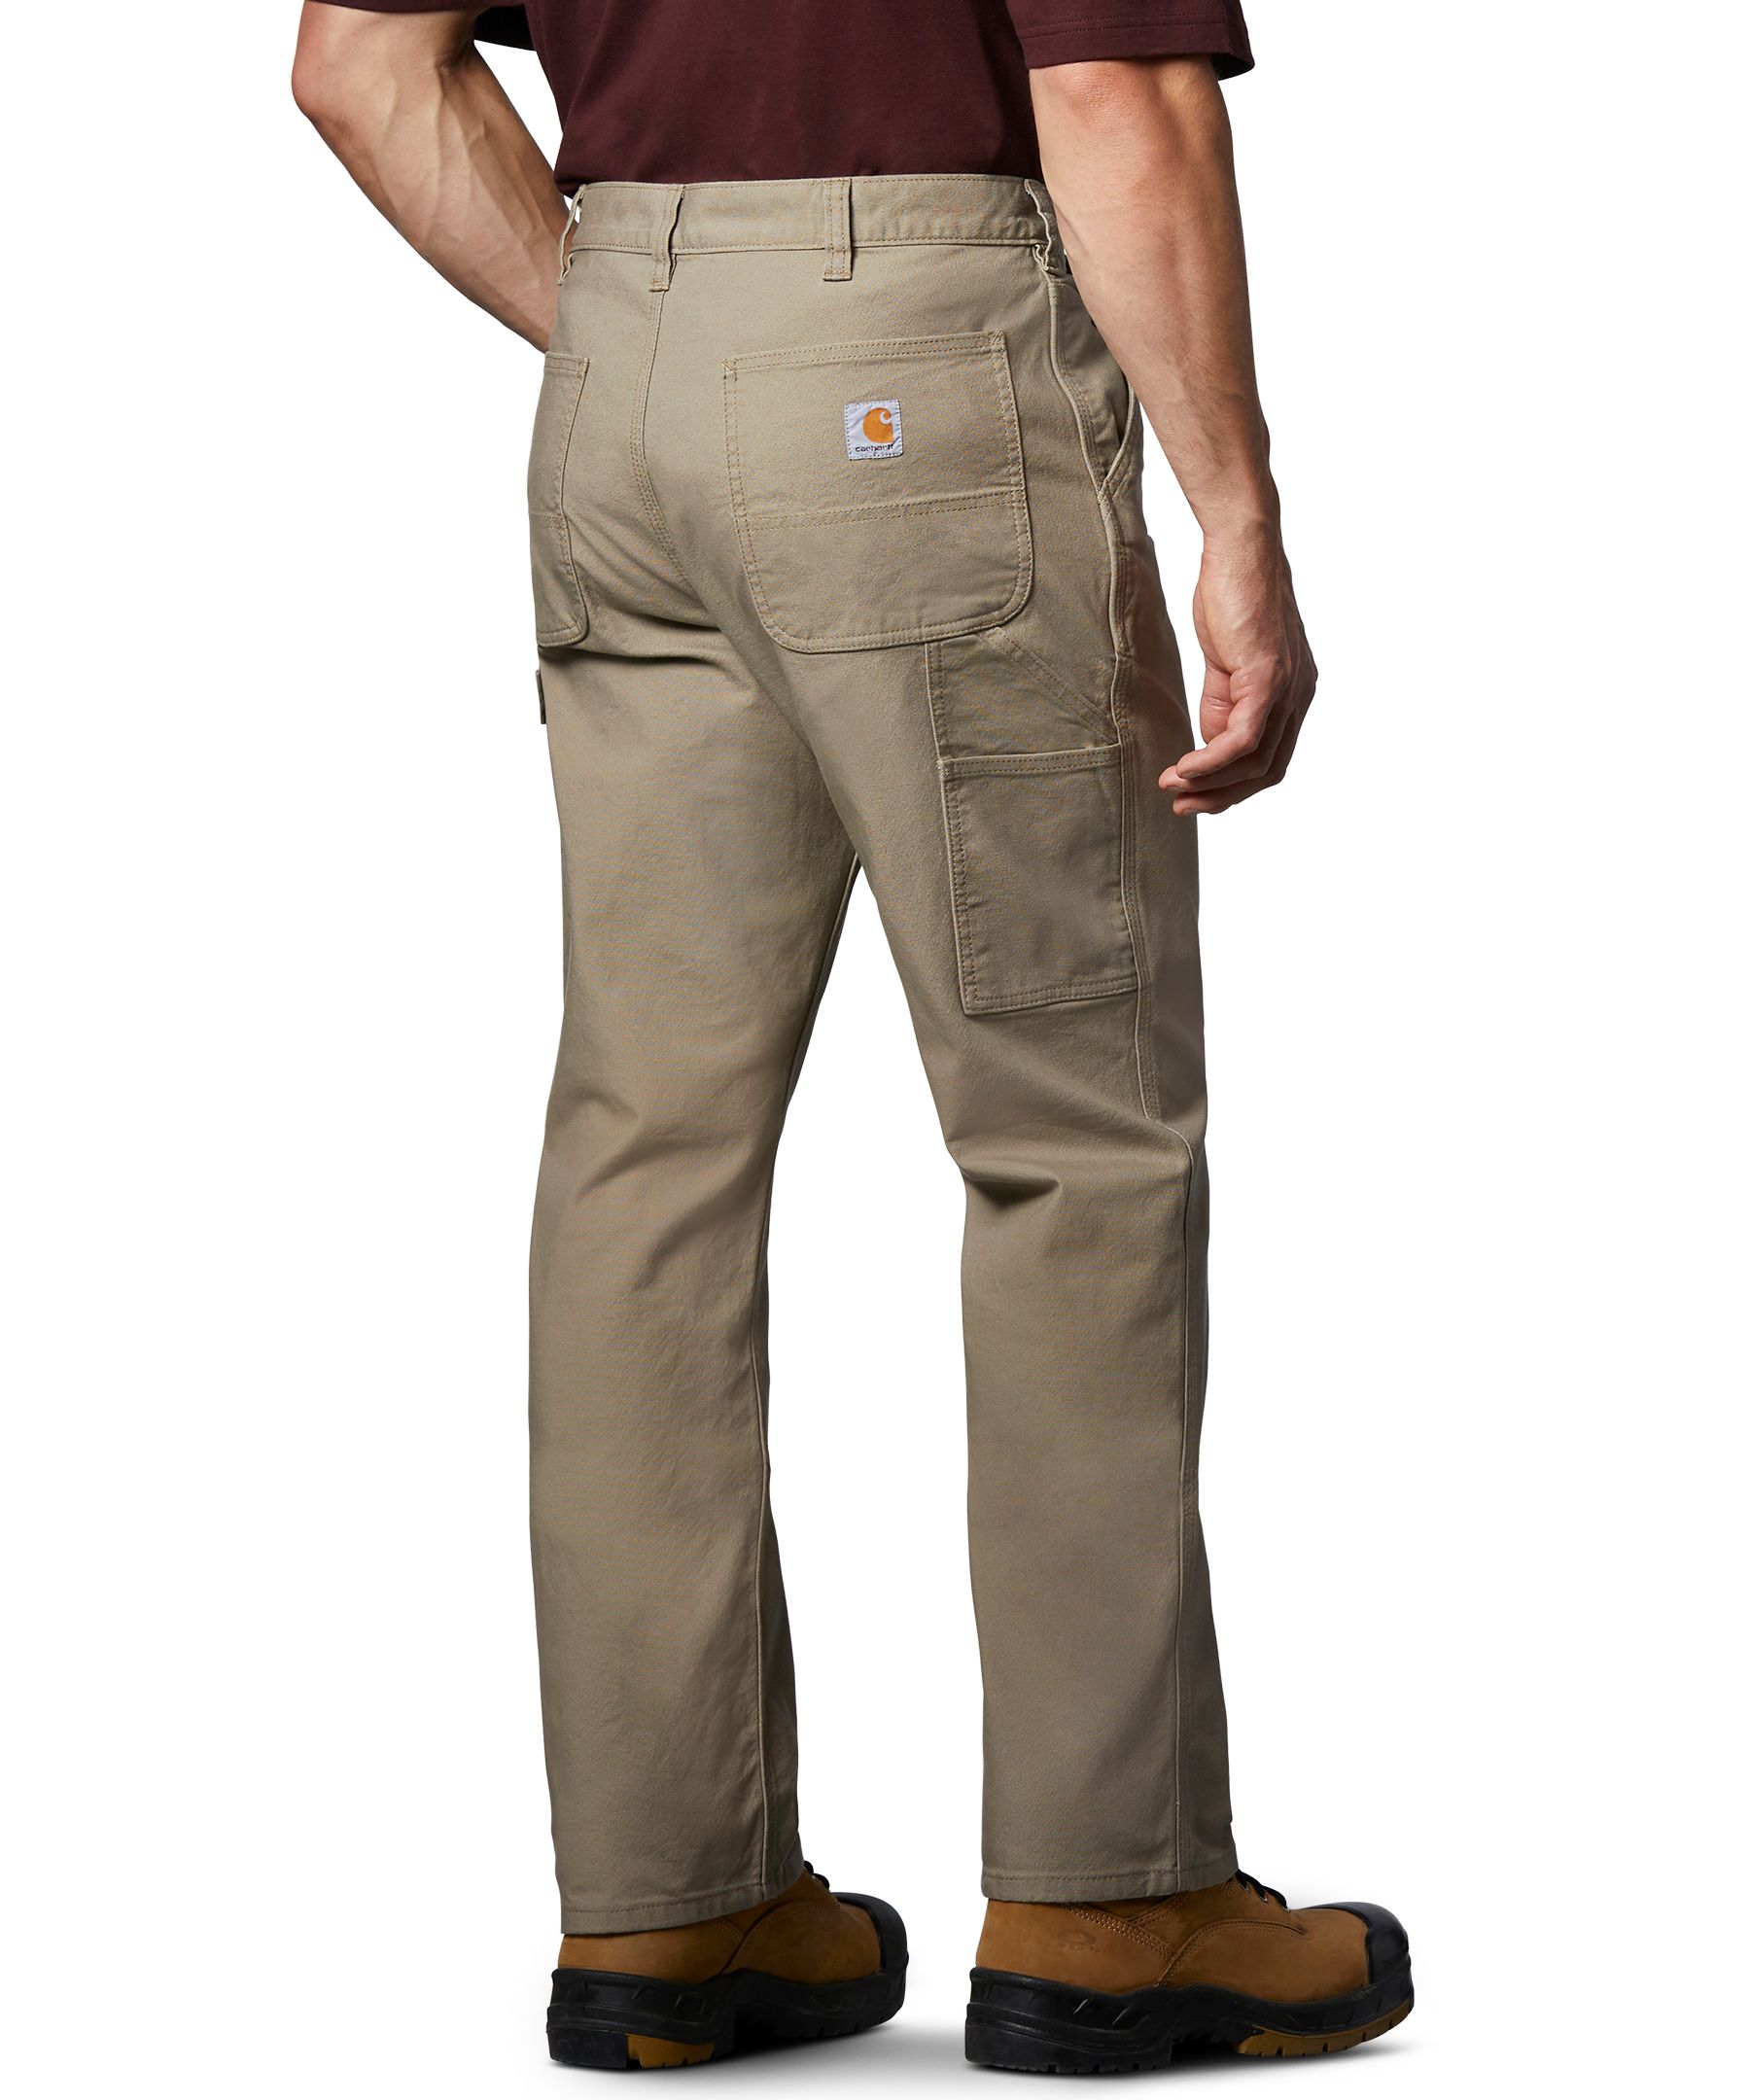 Carhartt Men's Relaxed Fit Rugged Flex Stretch Duck Utility Pants